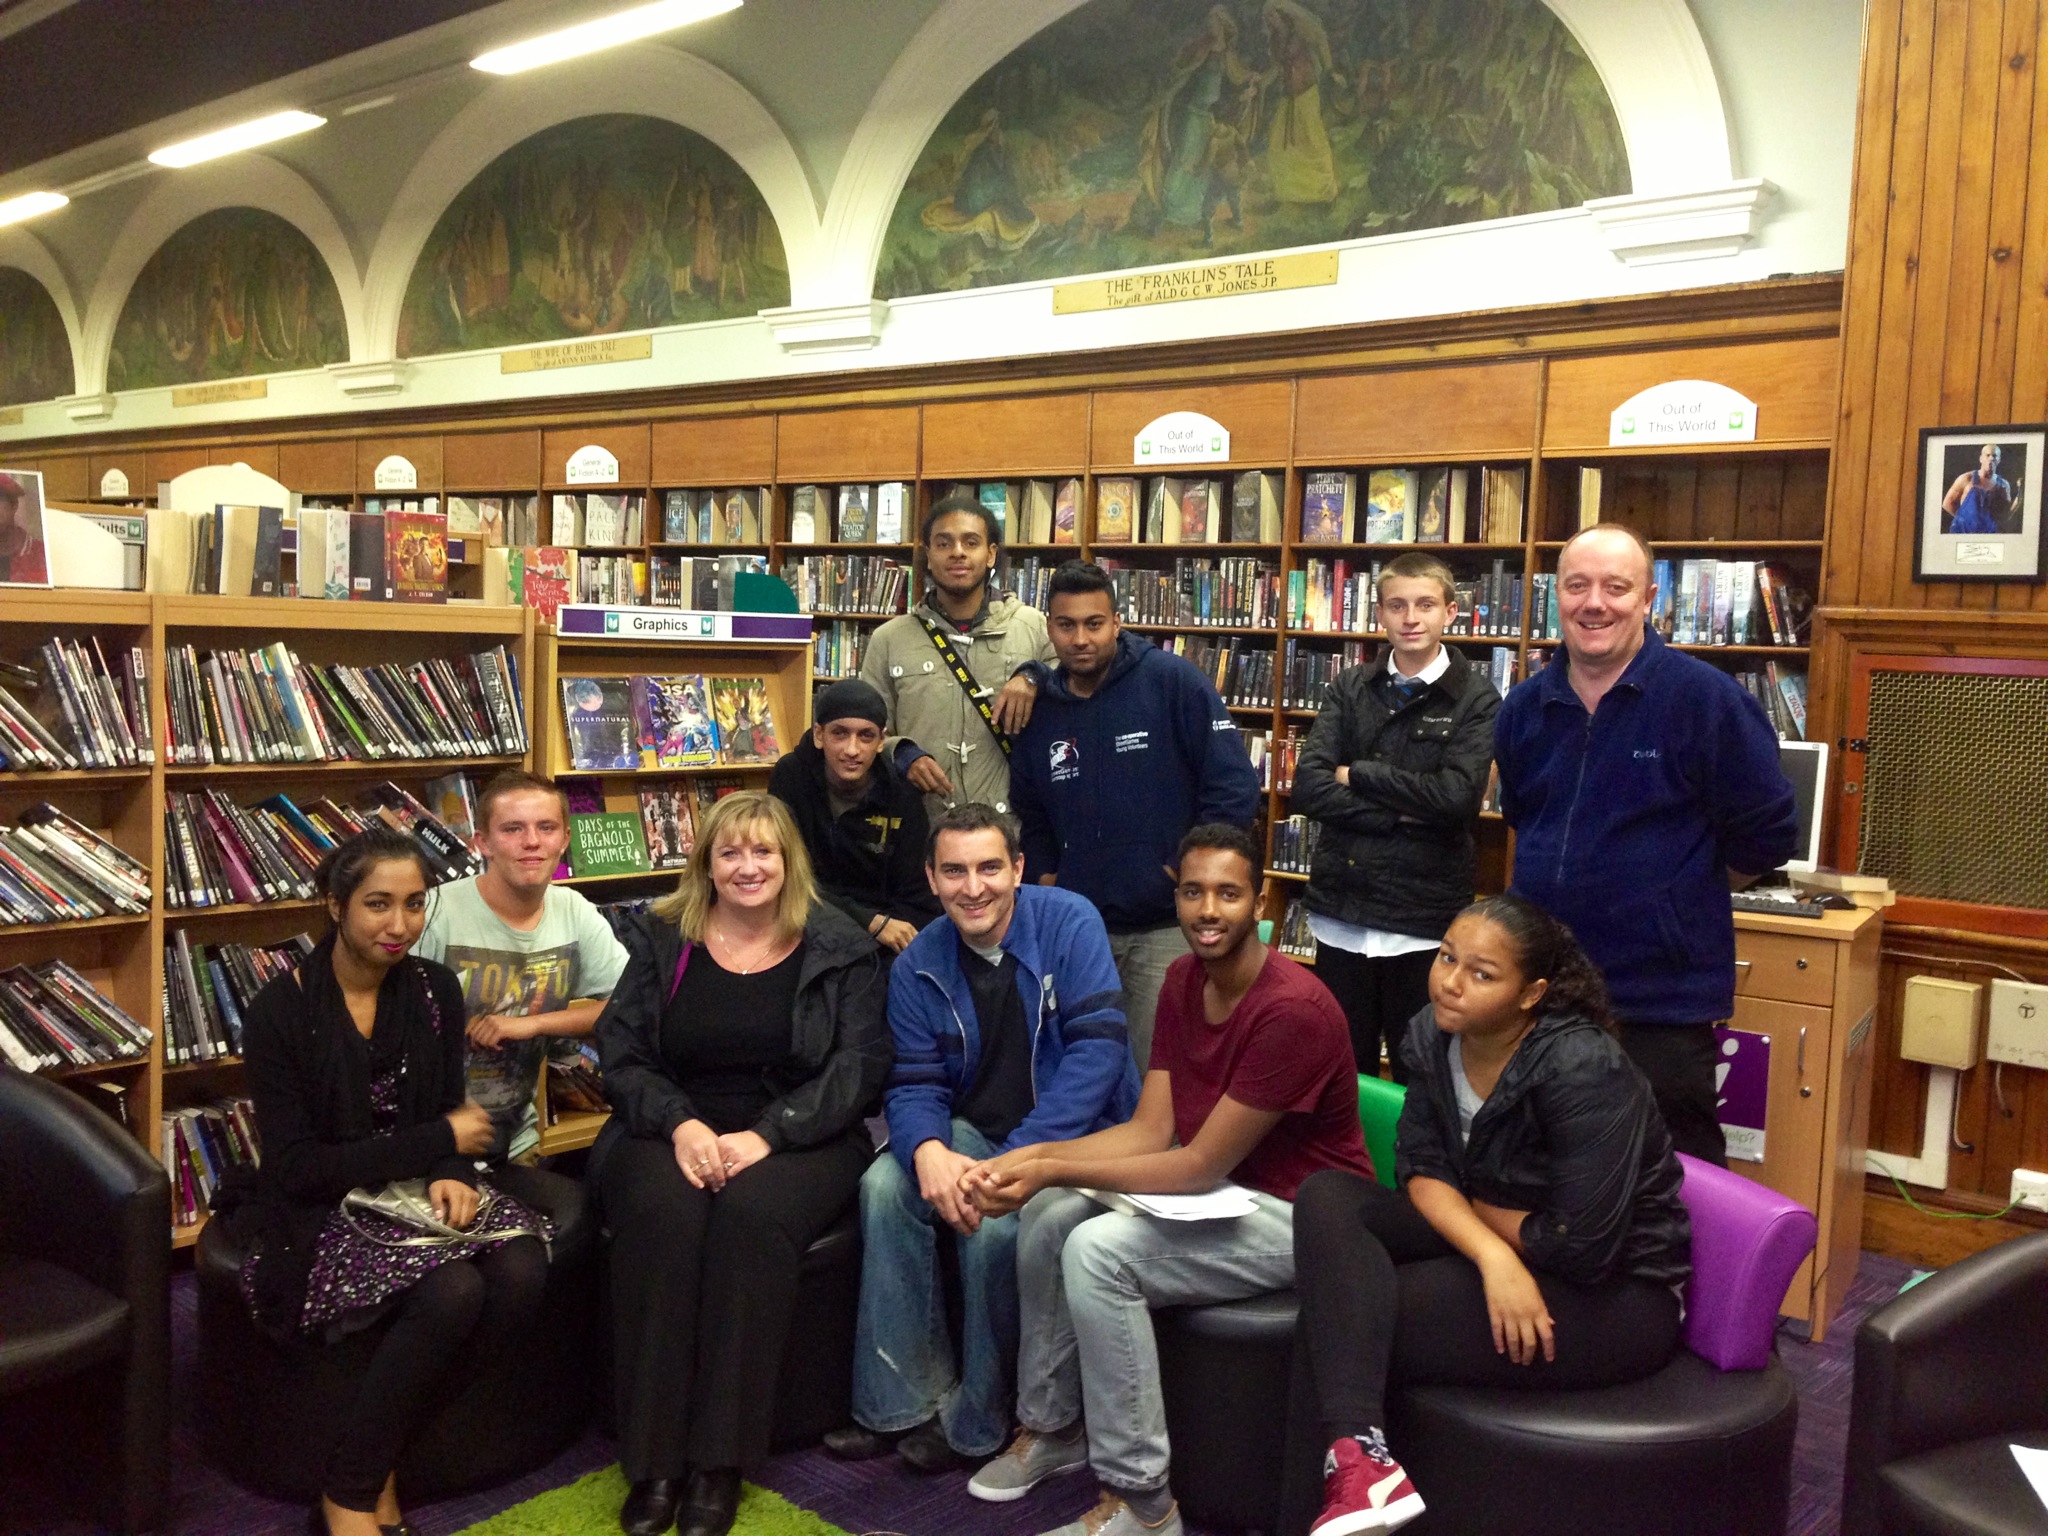 West Bromwich Youth Council get involved in planning events for West Bromwich Town Centre